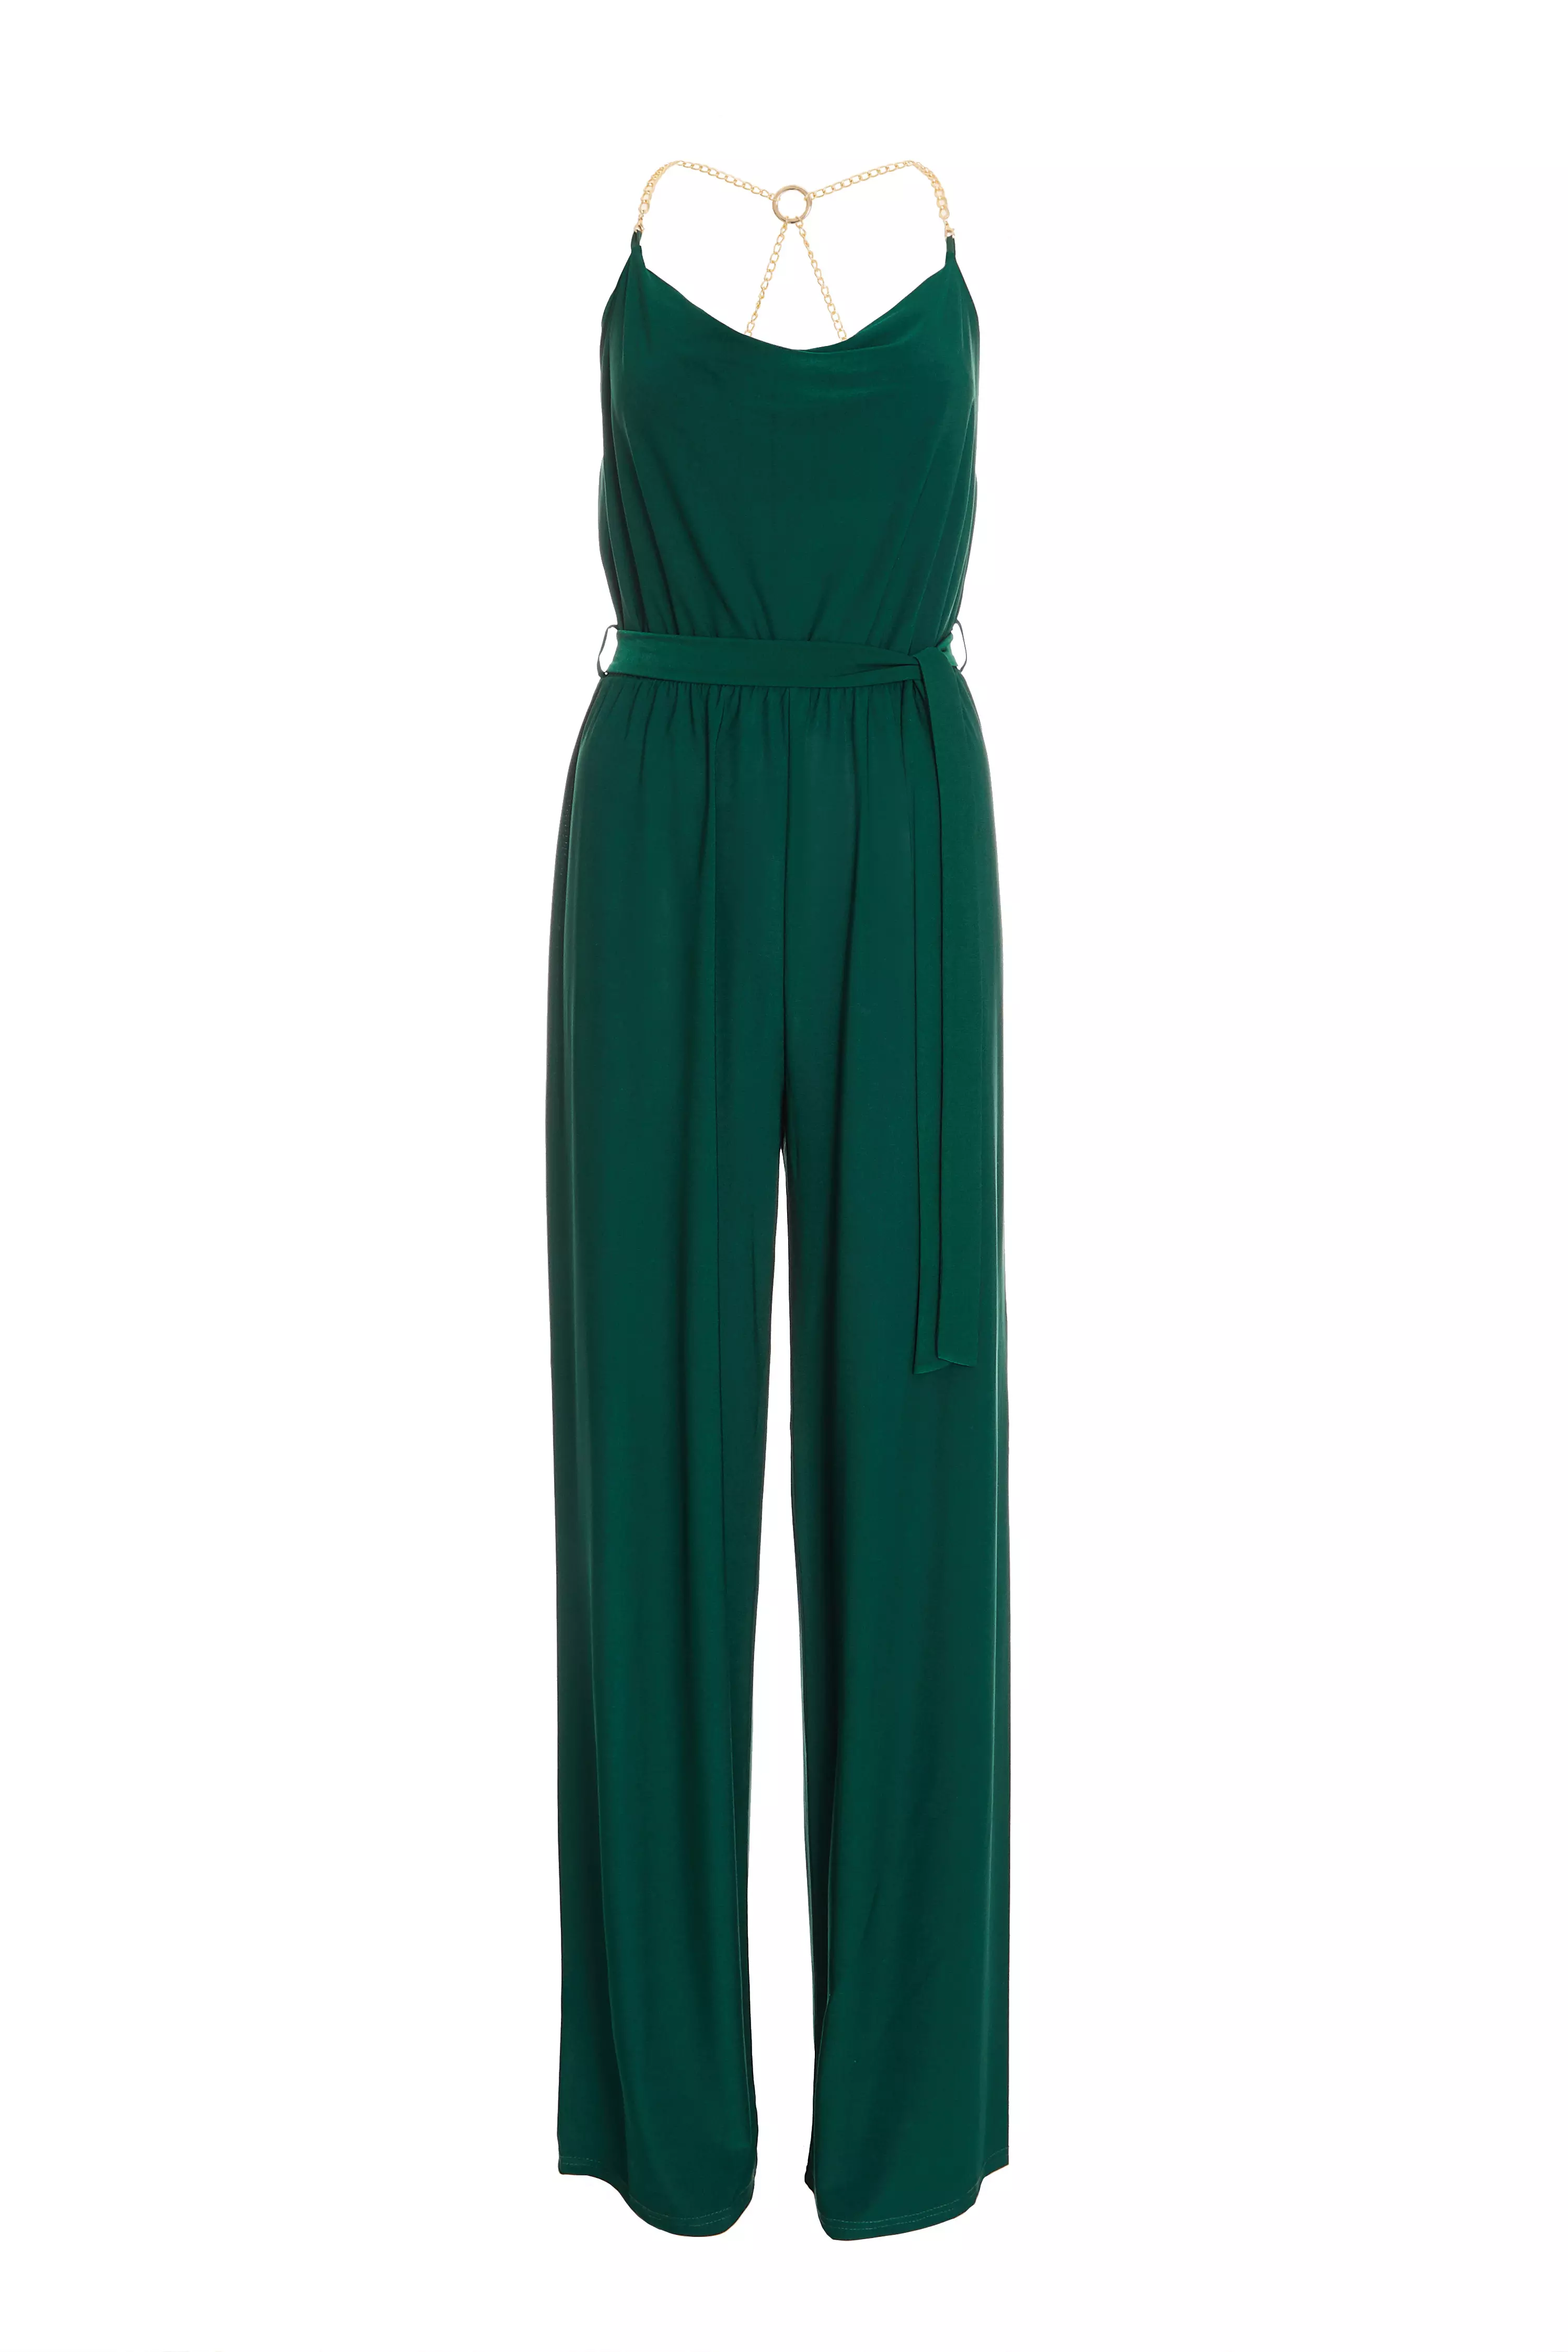 Green Cowl Neck Palazzo Jumpsuit